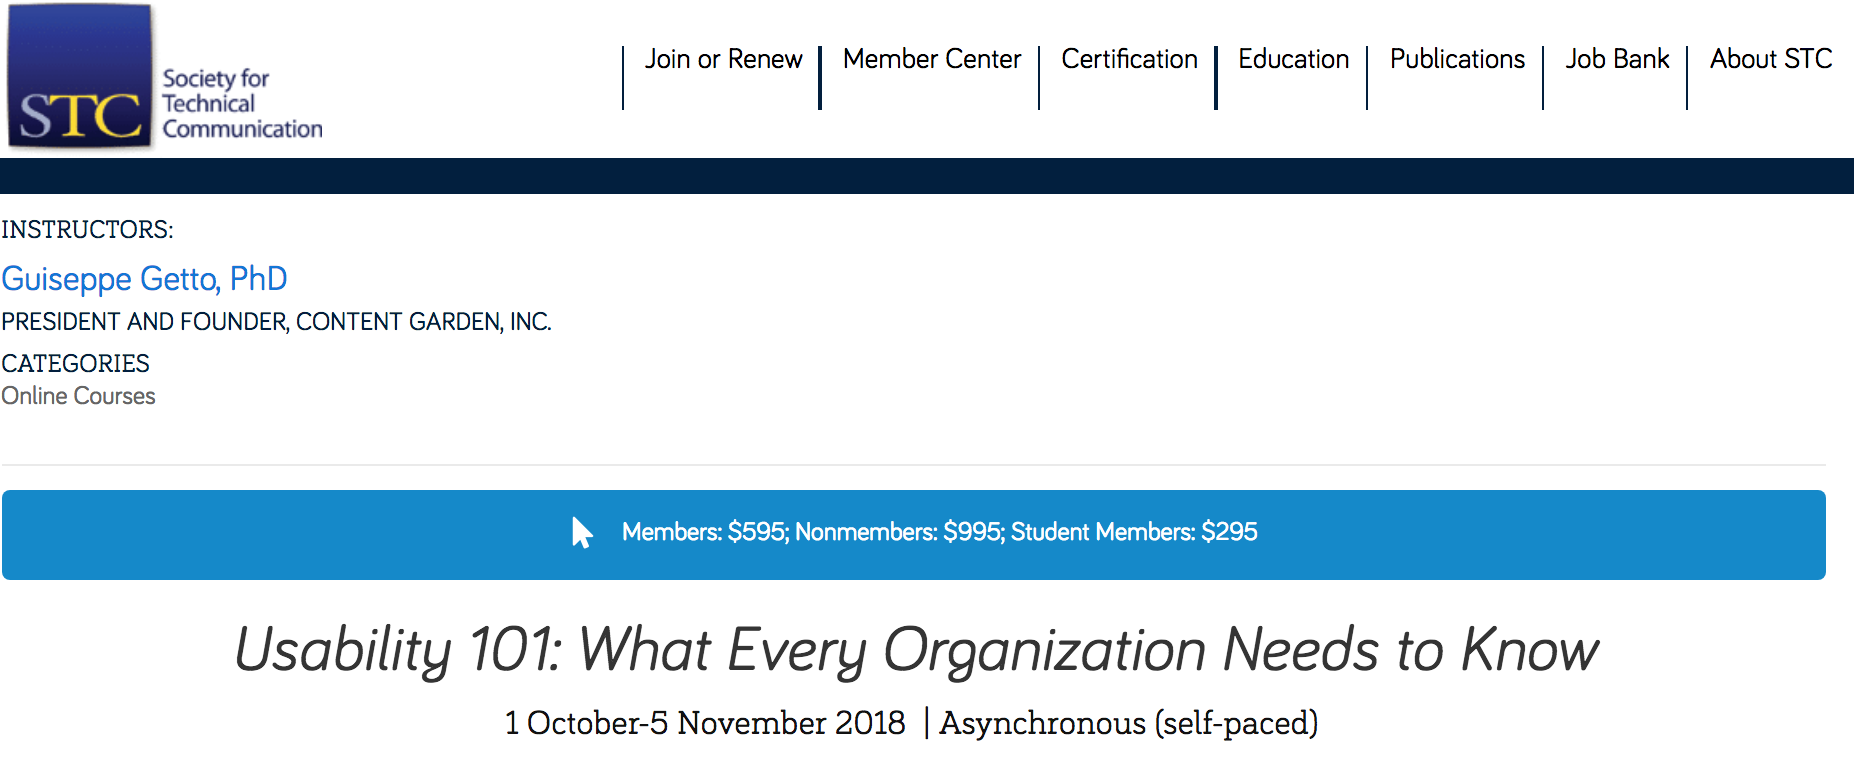 A screenshot of the signup for the Usability 101 class for the STC, published to: "Learn Usability: Online Class for the Society for Technical Communication"